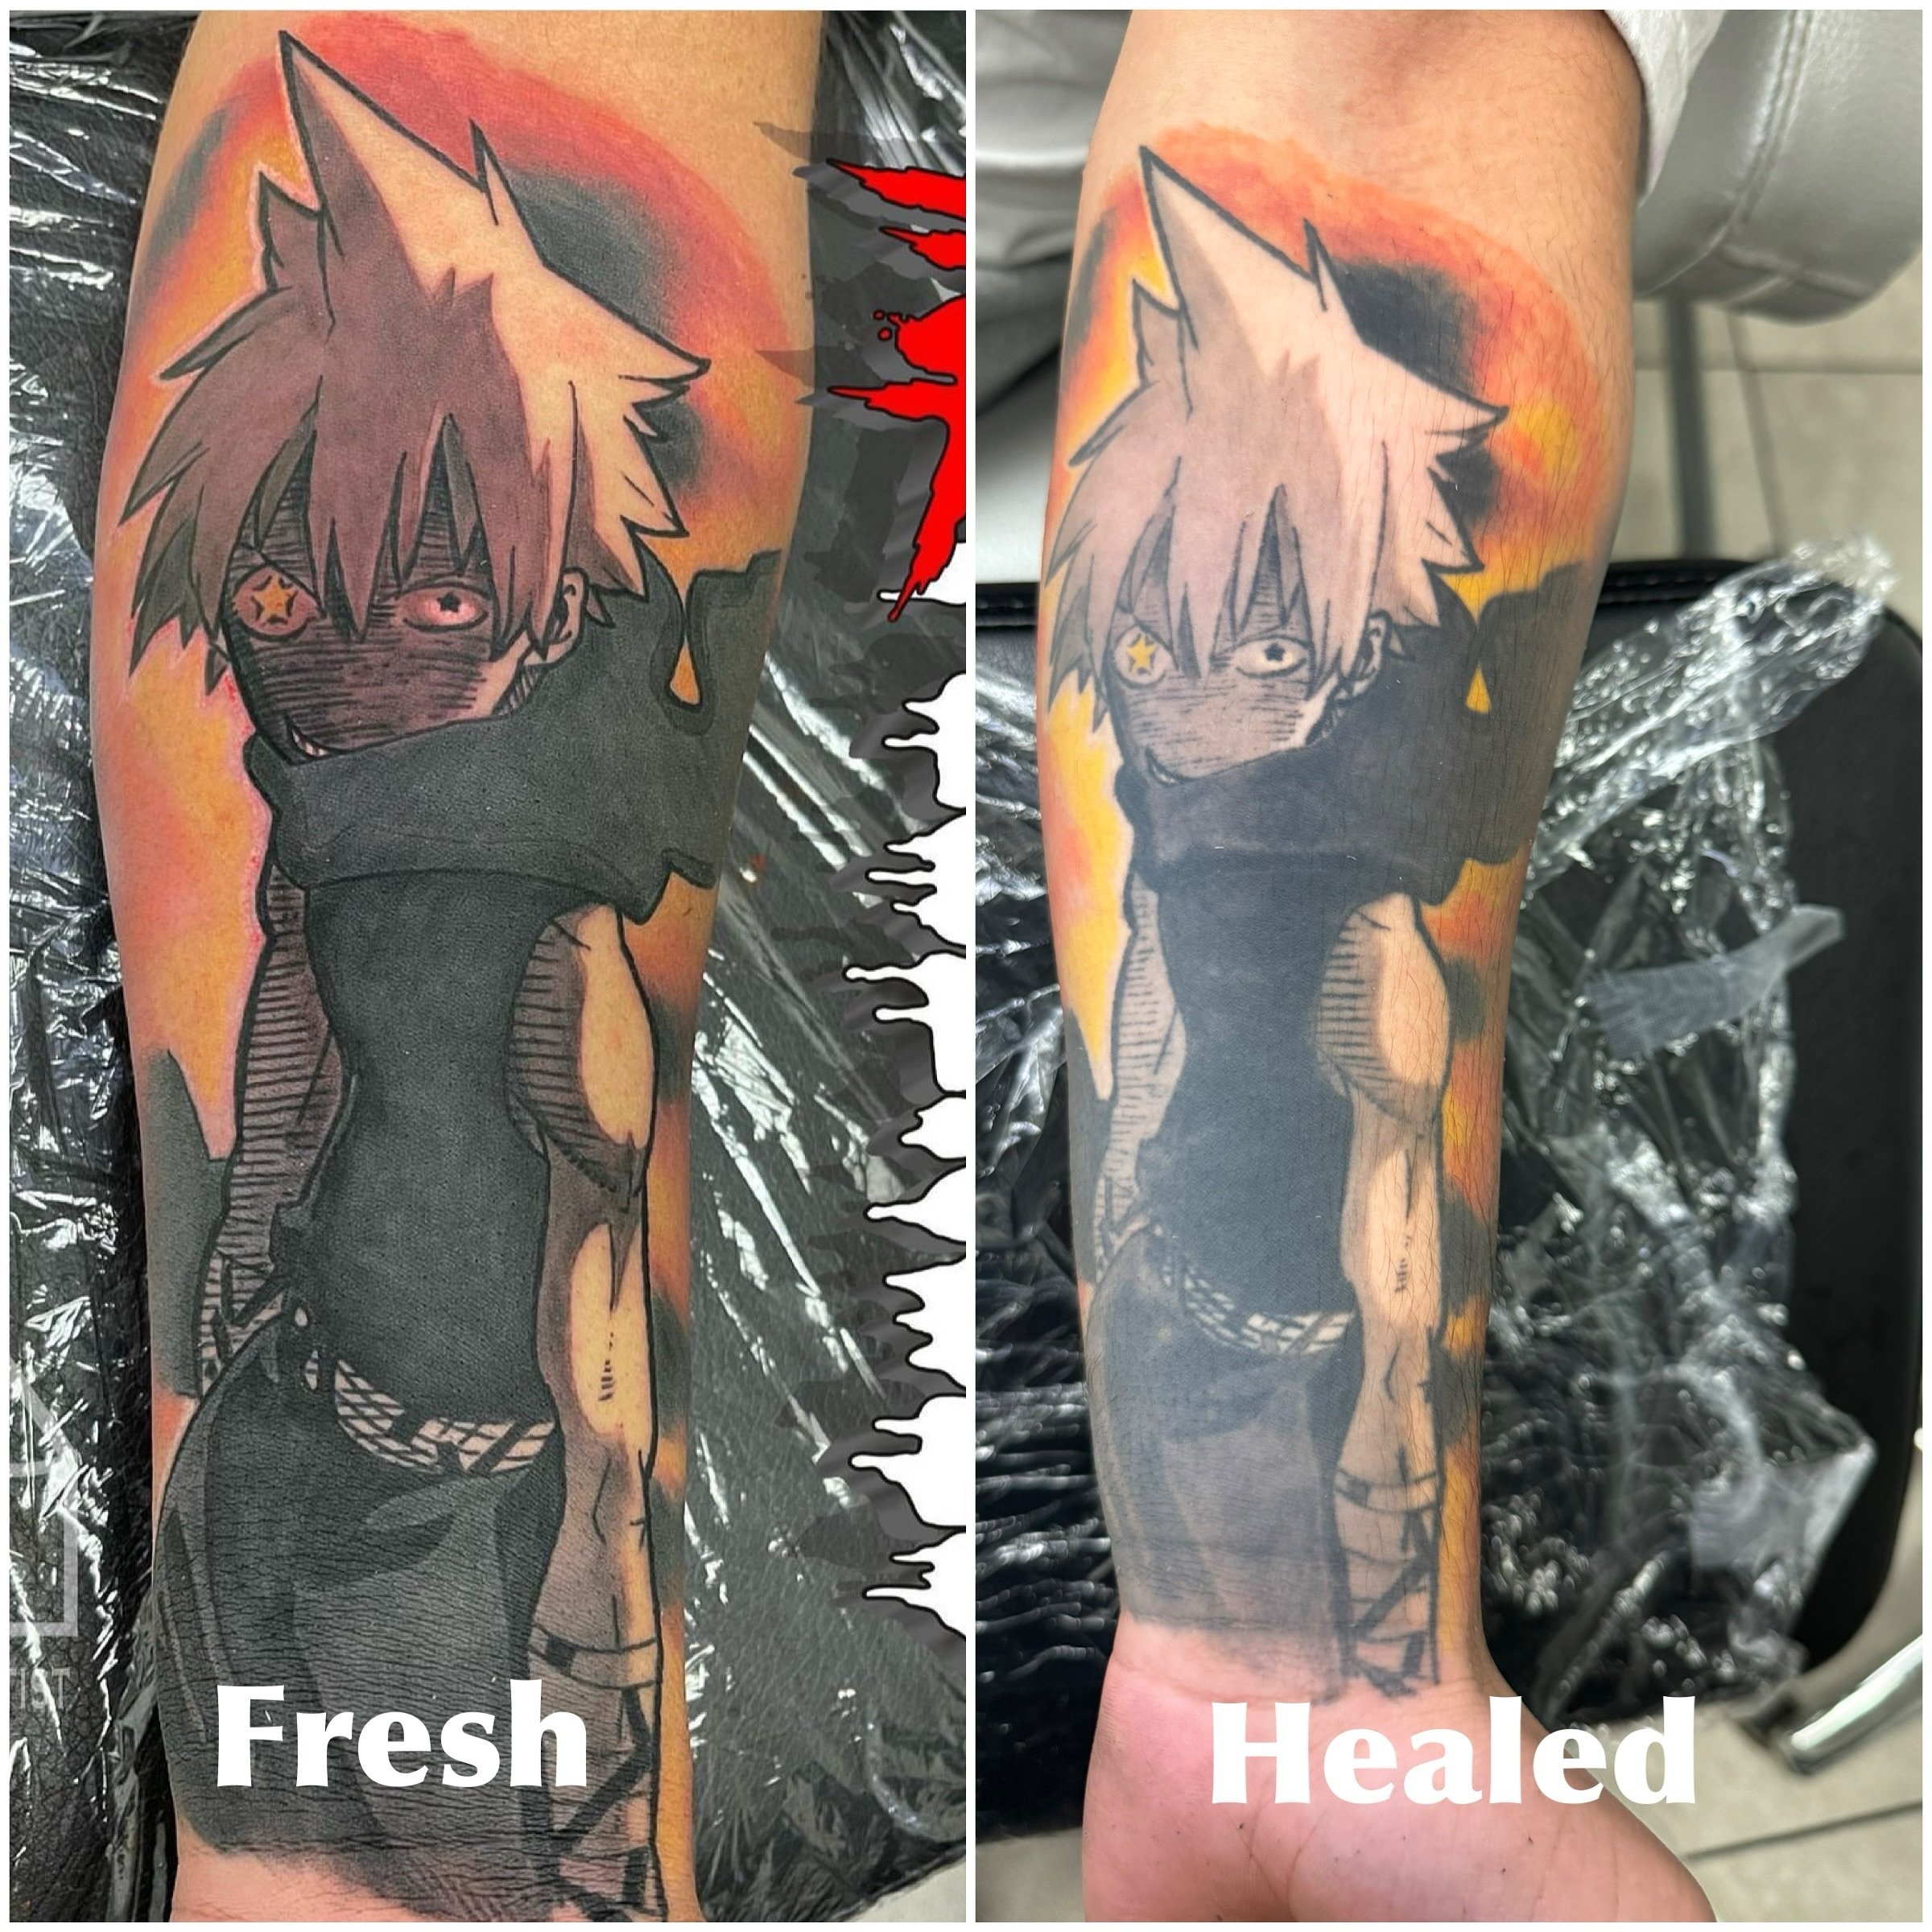 Fresh vs Healed about 4 or 5 years old